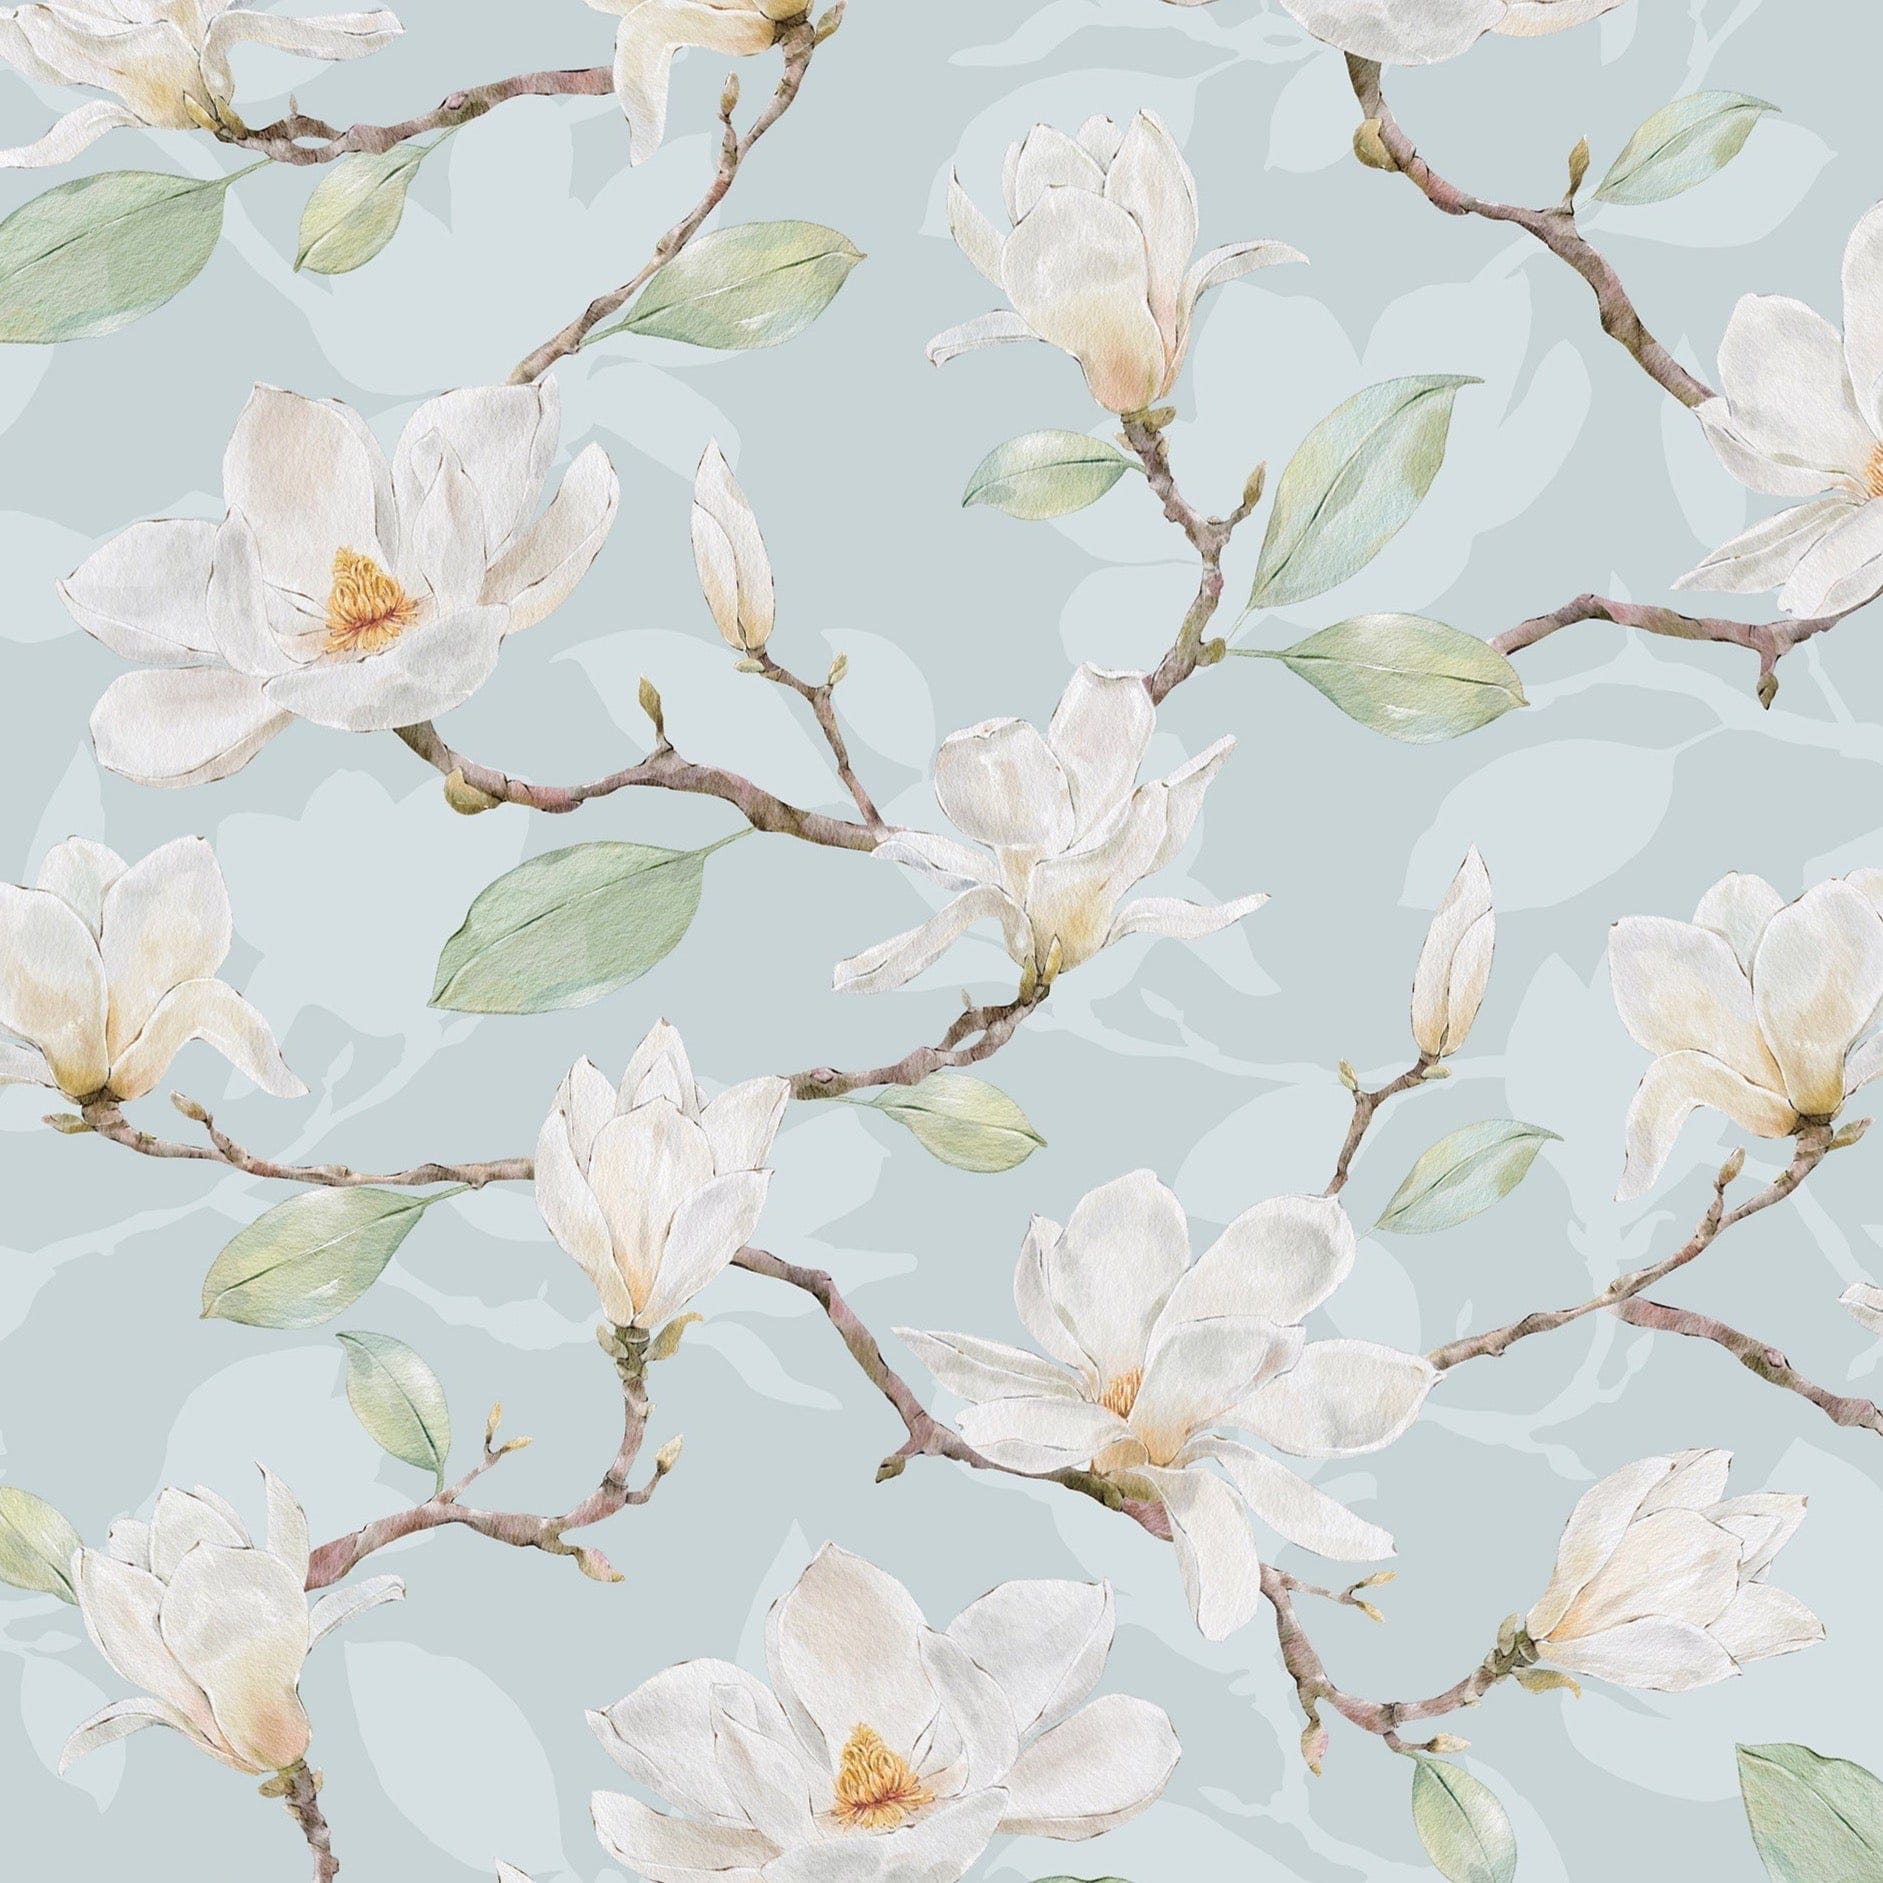 A close-up view of the 'Watercolour Magnolia Wallpaper II', where the artistry of the watercolor technique is evident in the soft brush strokes on the white magnolia flowers with hints of yellow at the center, set against a calming blue background, giving a touch of nature's elegance to any room.